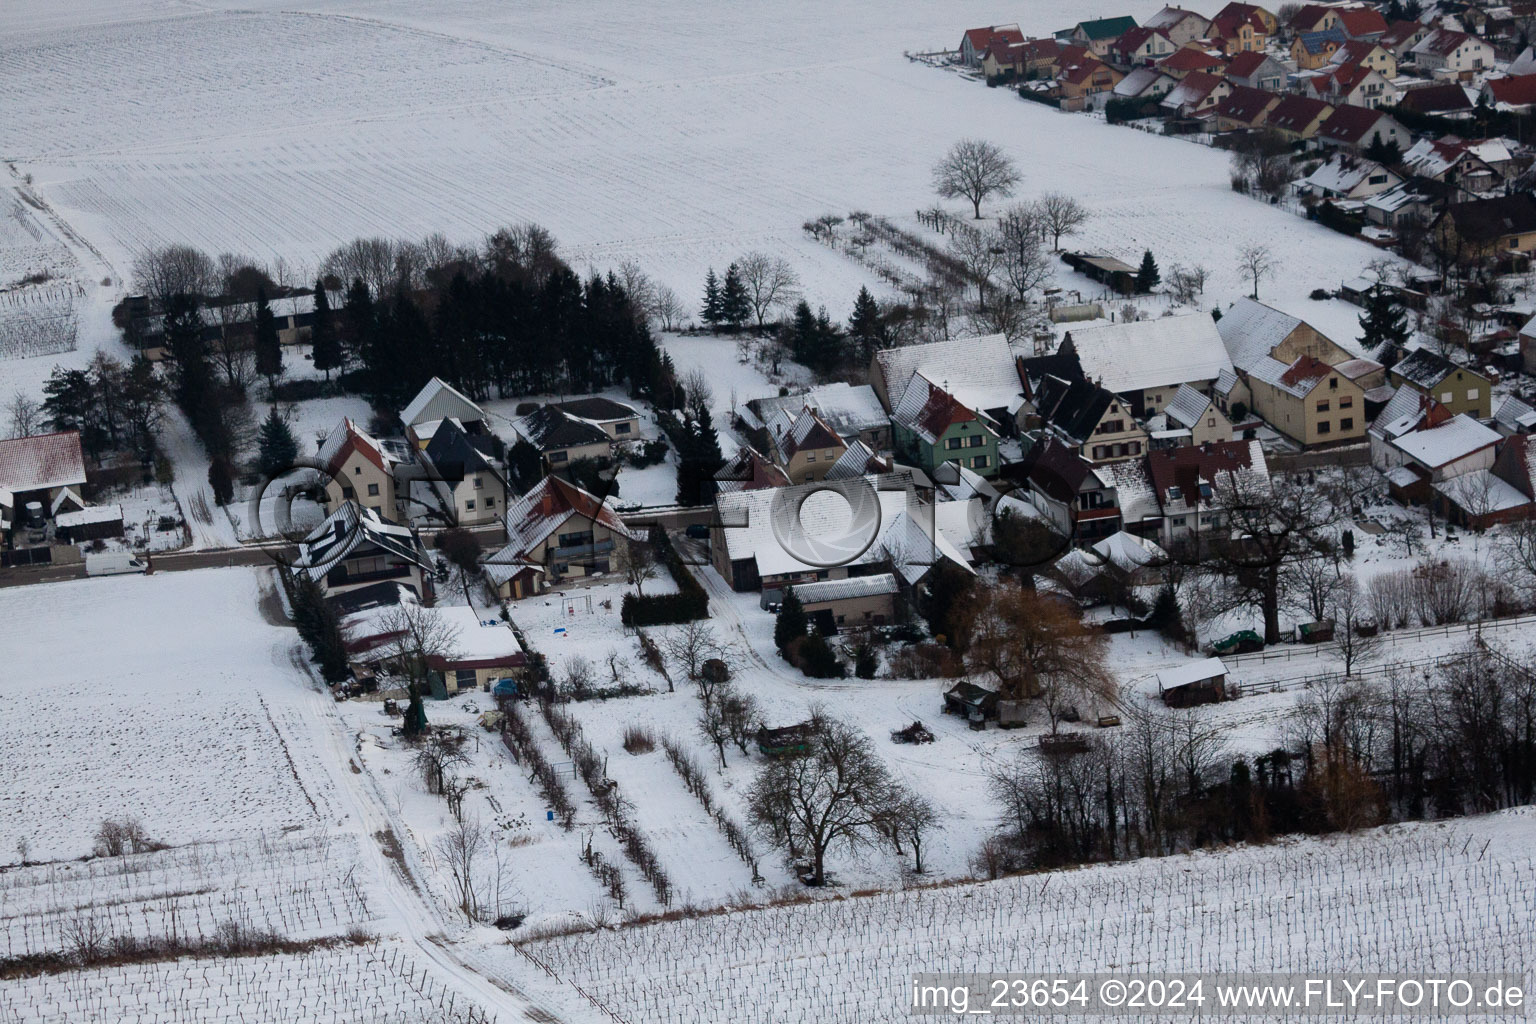 In the snow in winter in the district Kleinsteinfeld in Niederotterbach in the state Rhineland-Palatinate, Germany viewn from the air